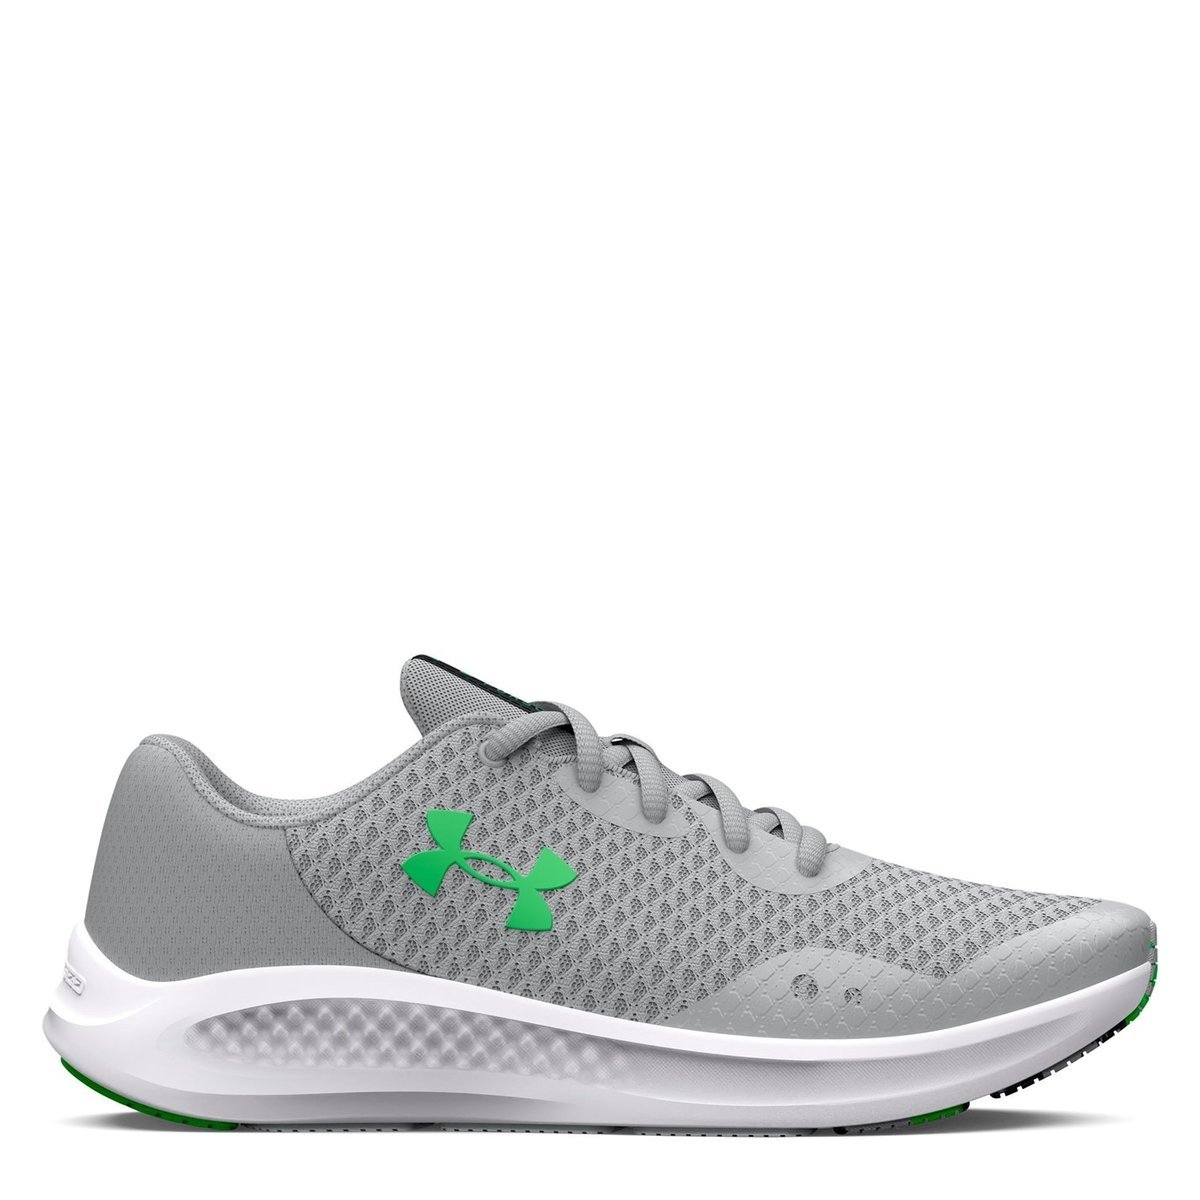 Under Armour Running Shoes - Lovell Sports page 6